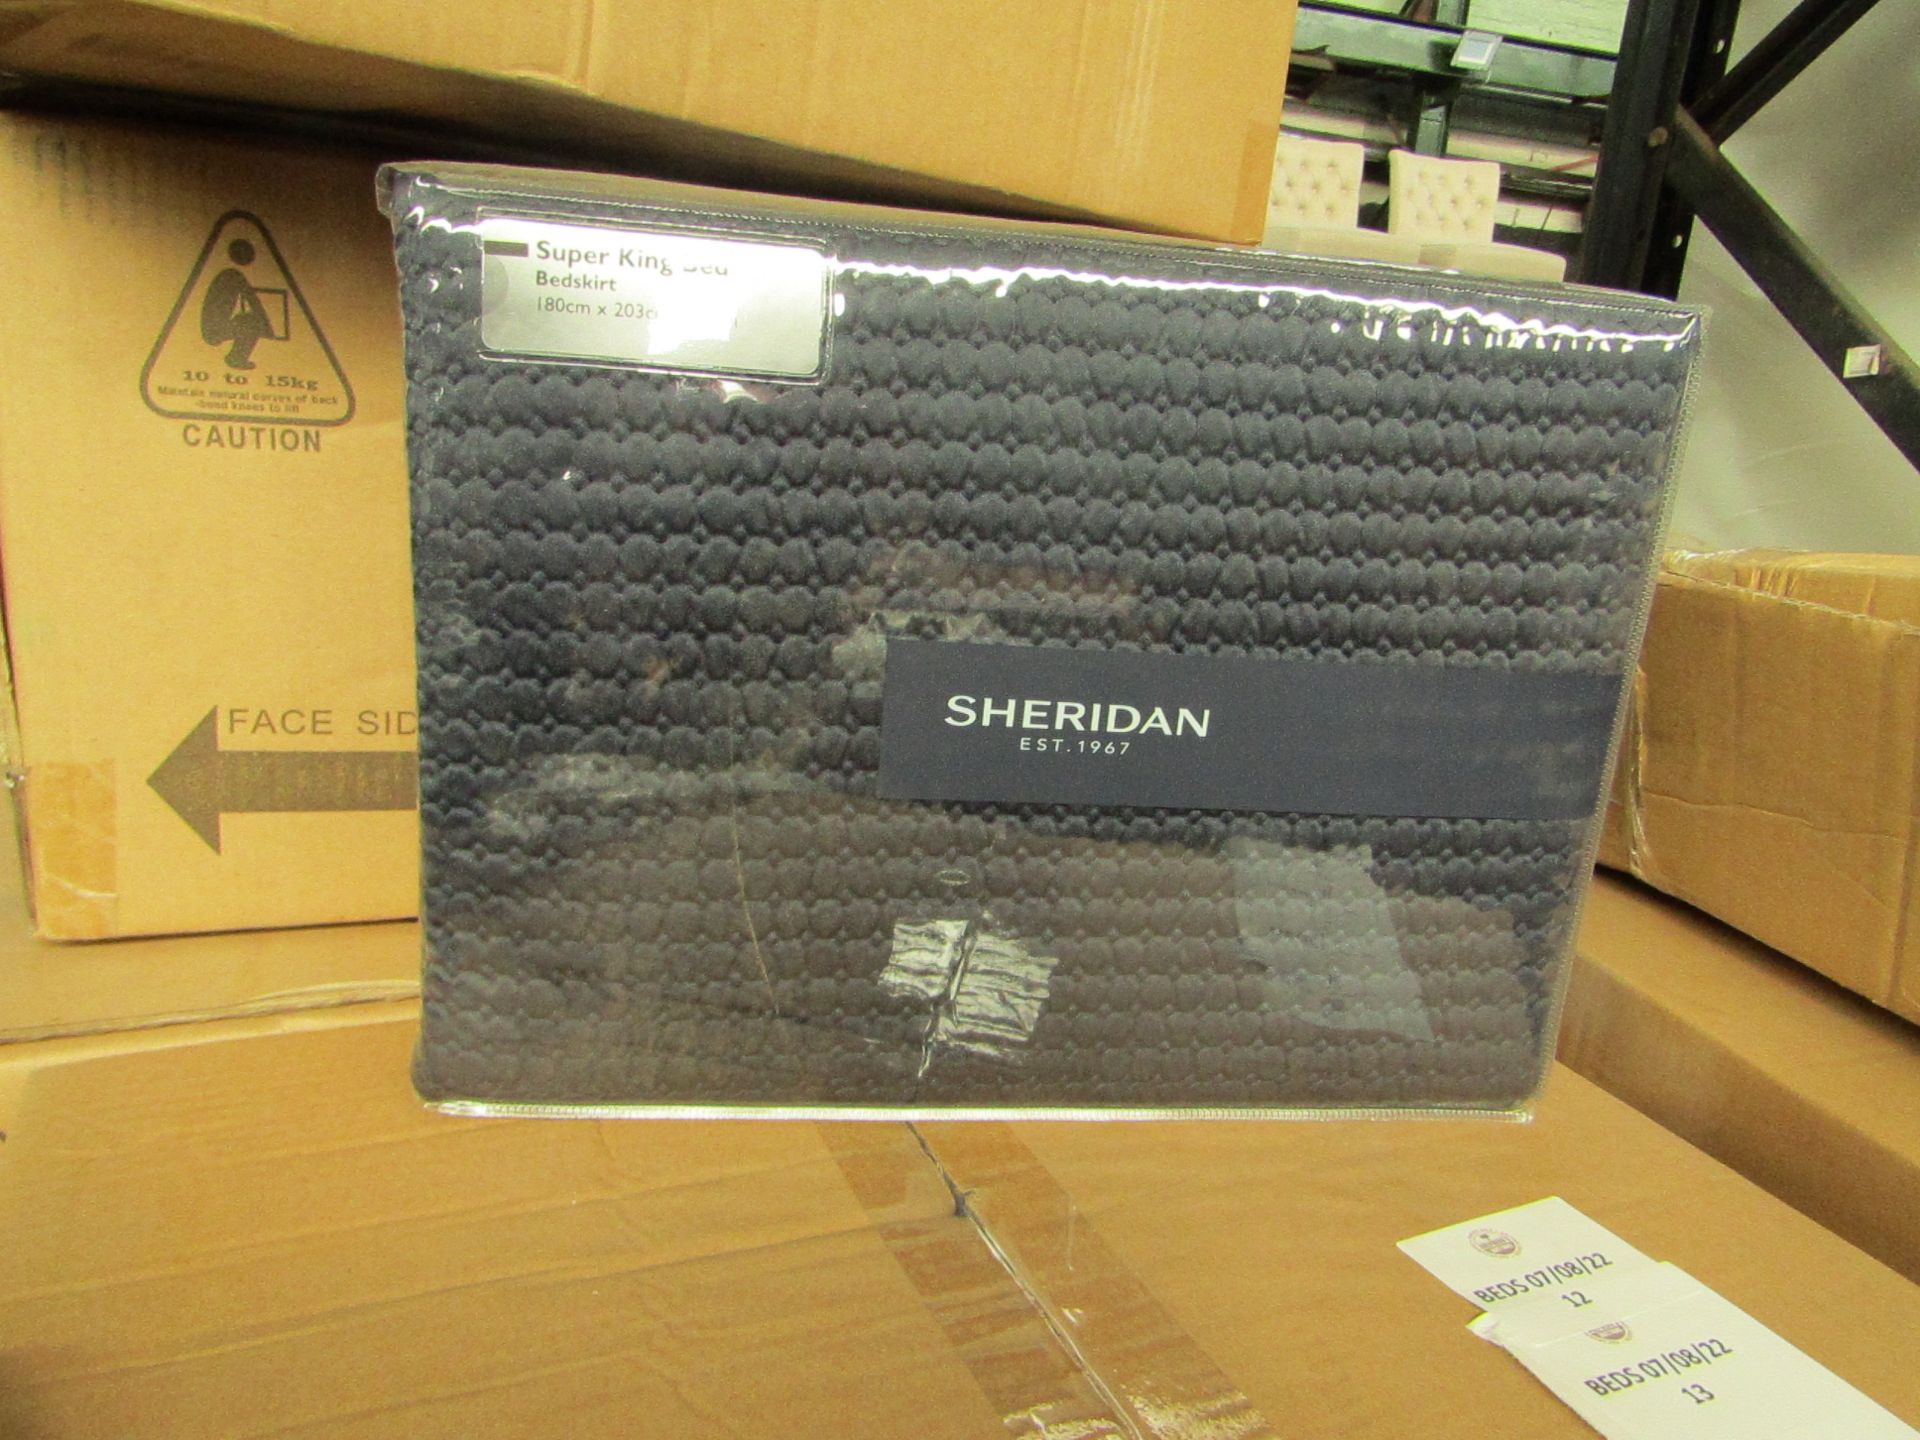 3X Sheridan - Luxury Bed Skirt - SuperKing Size - Midnight - New & Boxed. RRP £75 Each.